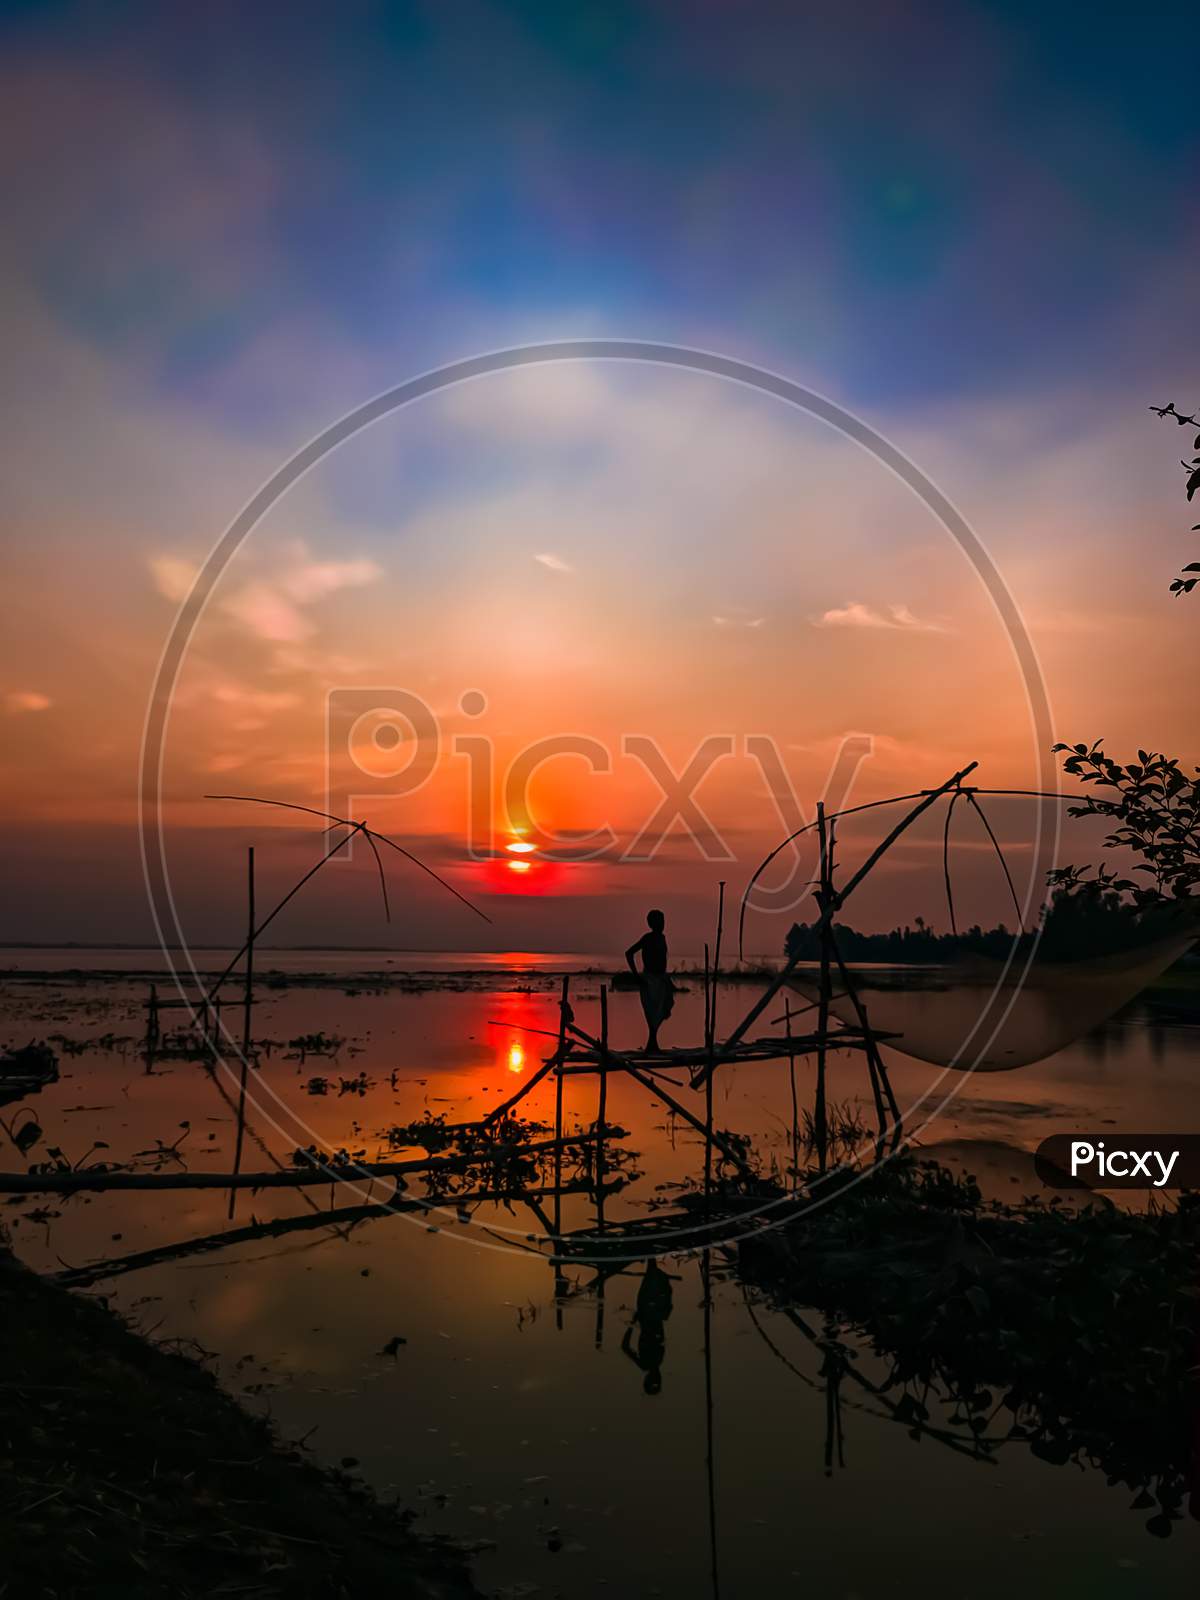 A fisherman in silhouette at sunset, standing on a Chinese Fishing net